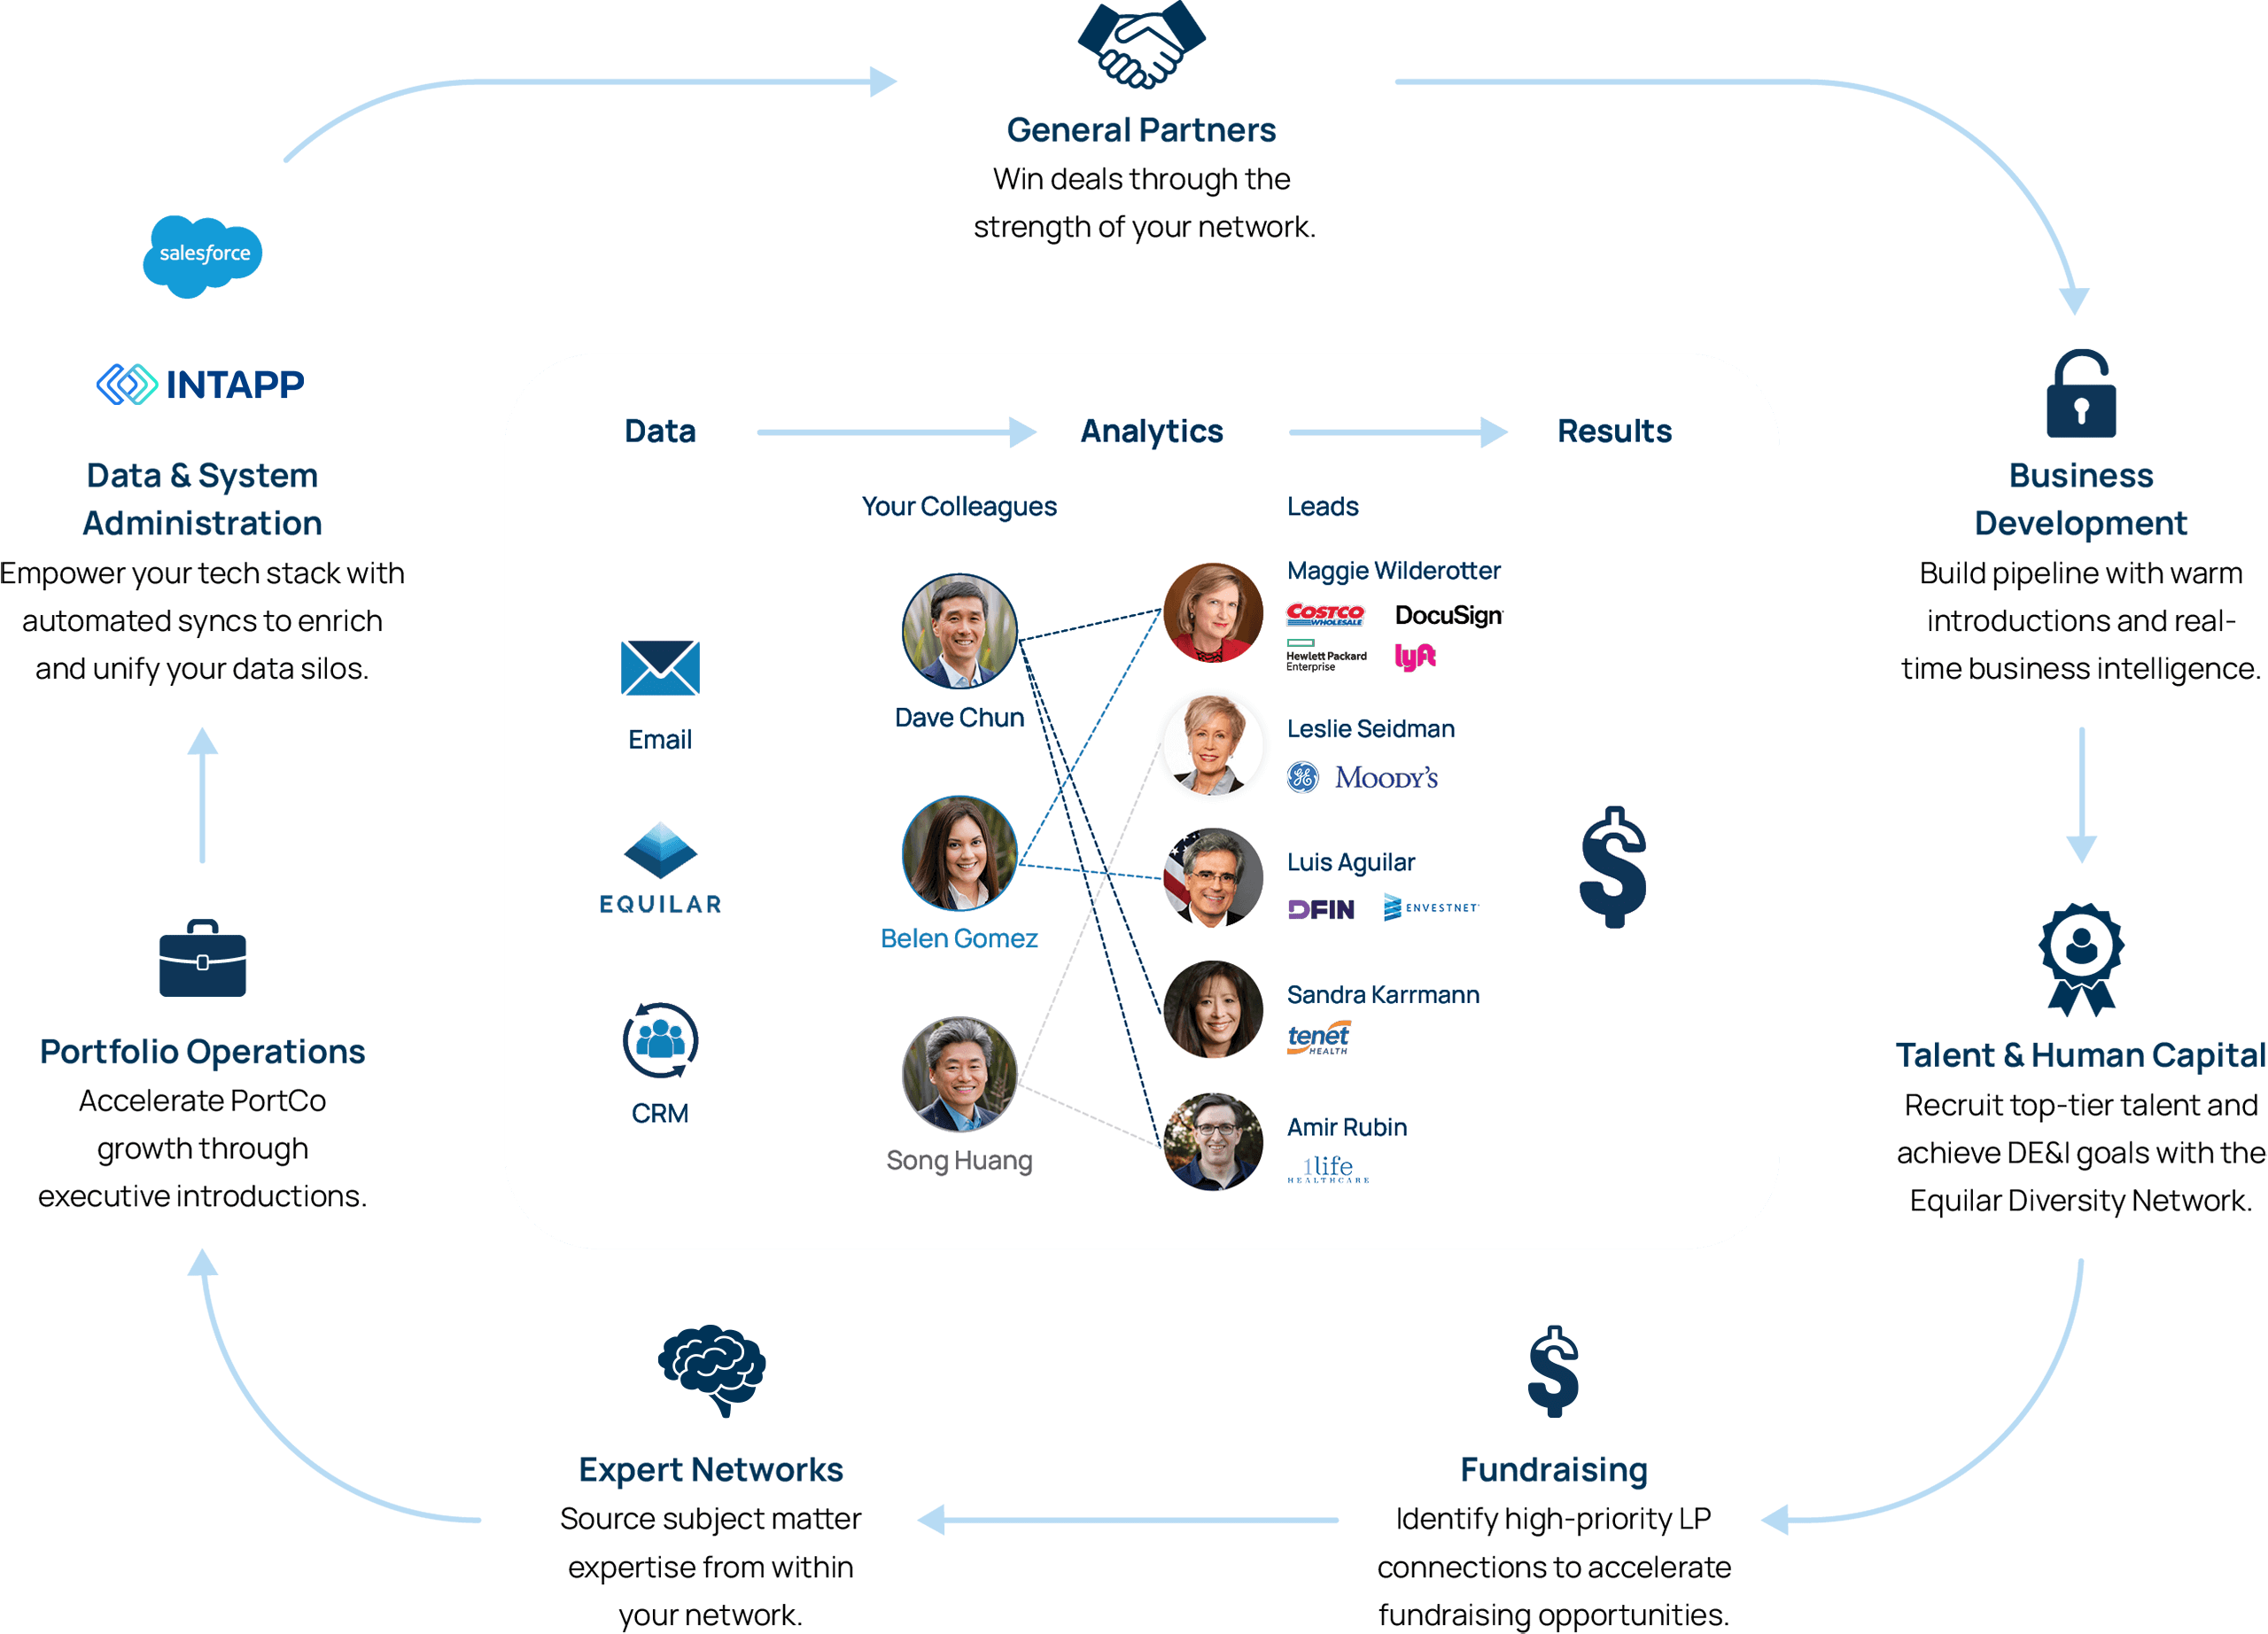 Relationships Win Deals: Use Equilar ExecAtlas to maximize network connections and win deals with access to an extensive database of executives and board members